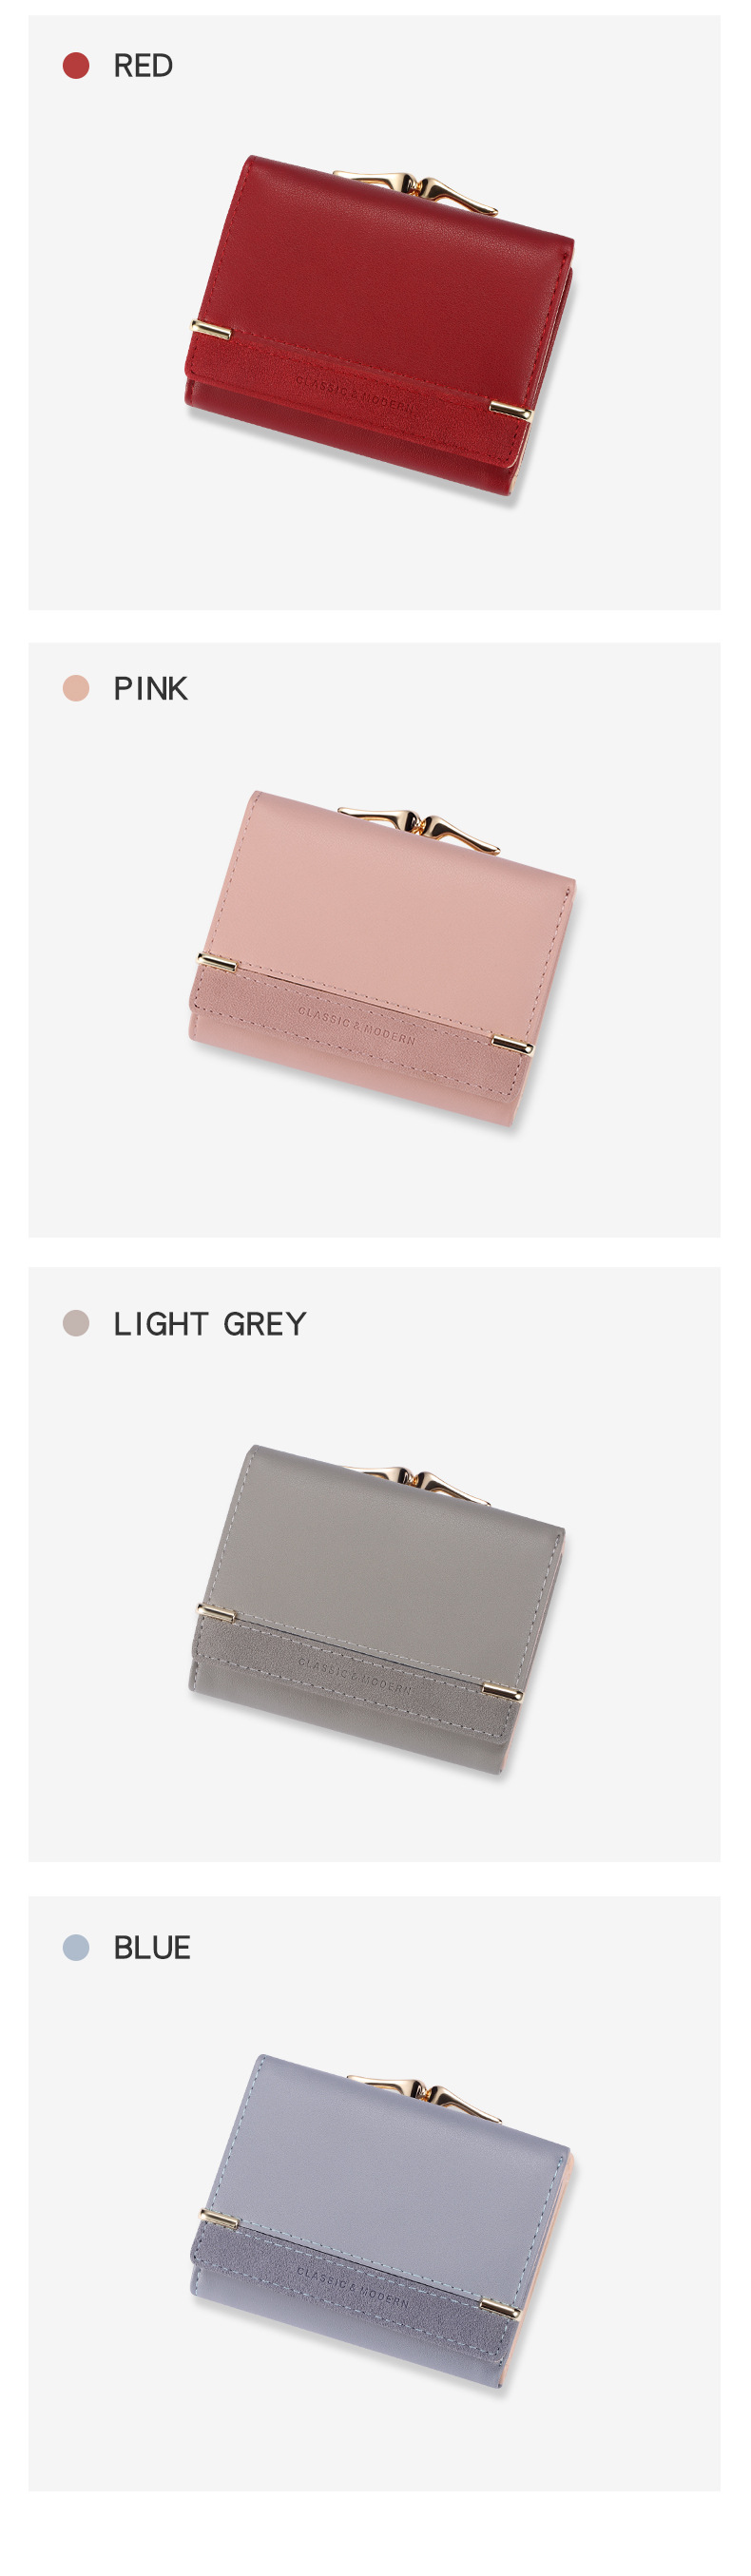 New Ladies Wallets Purse Custom Short Small Mini PU Leather Card Holder Wallet for Women(图8)